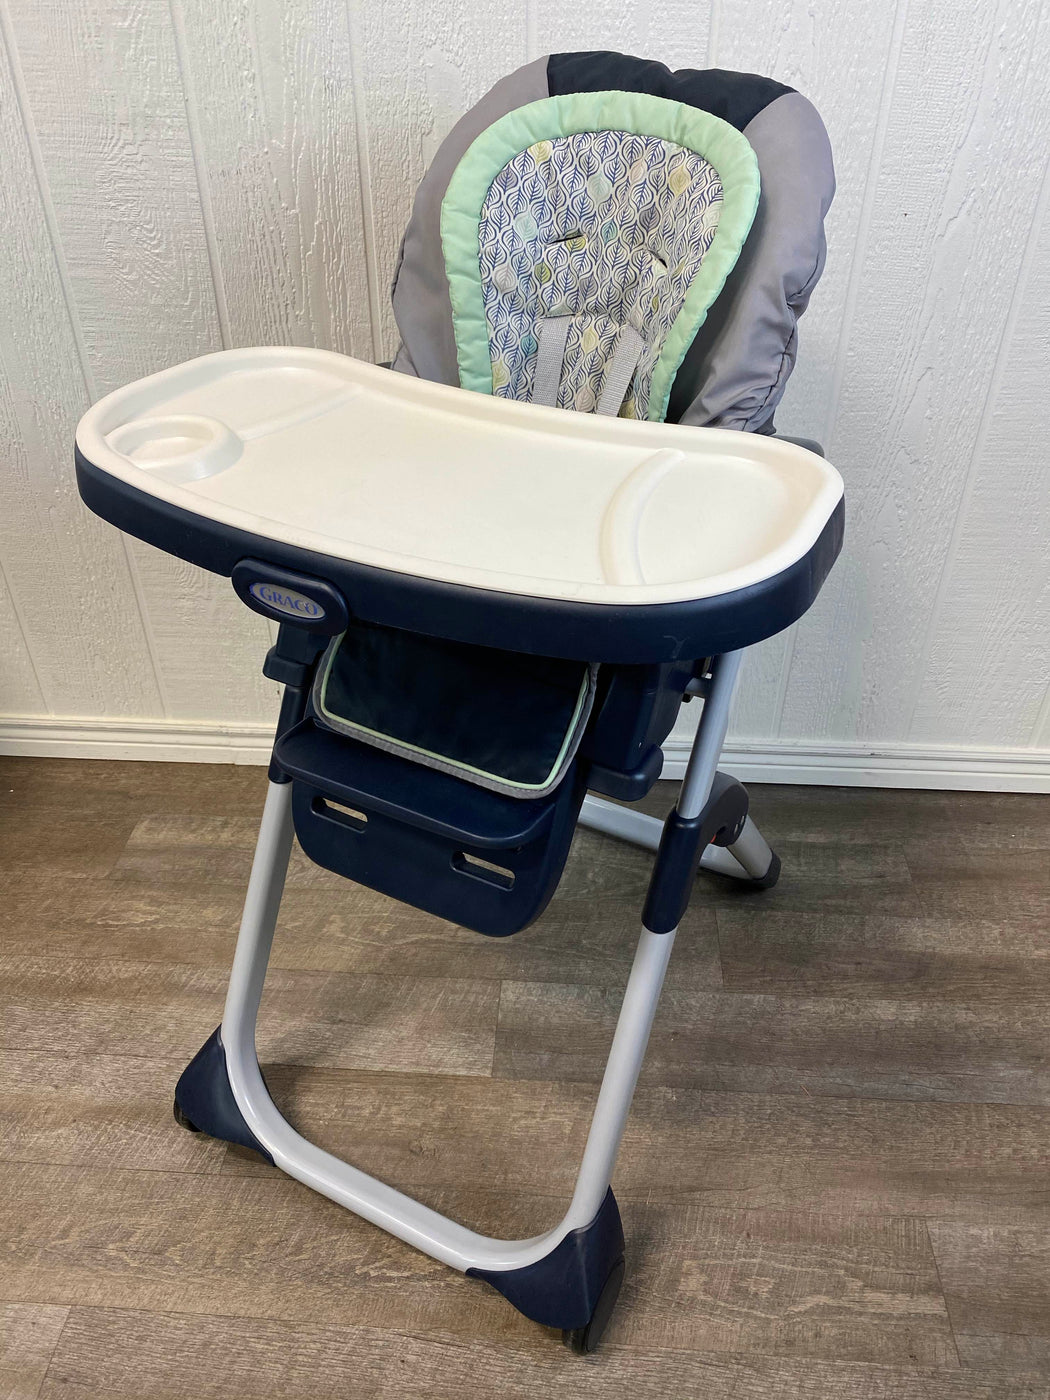 graco duodiner lx baby high chair